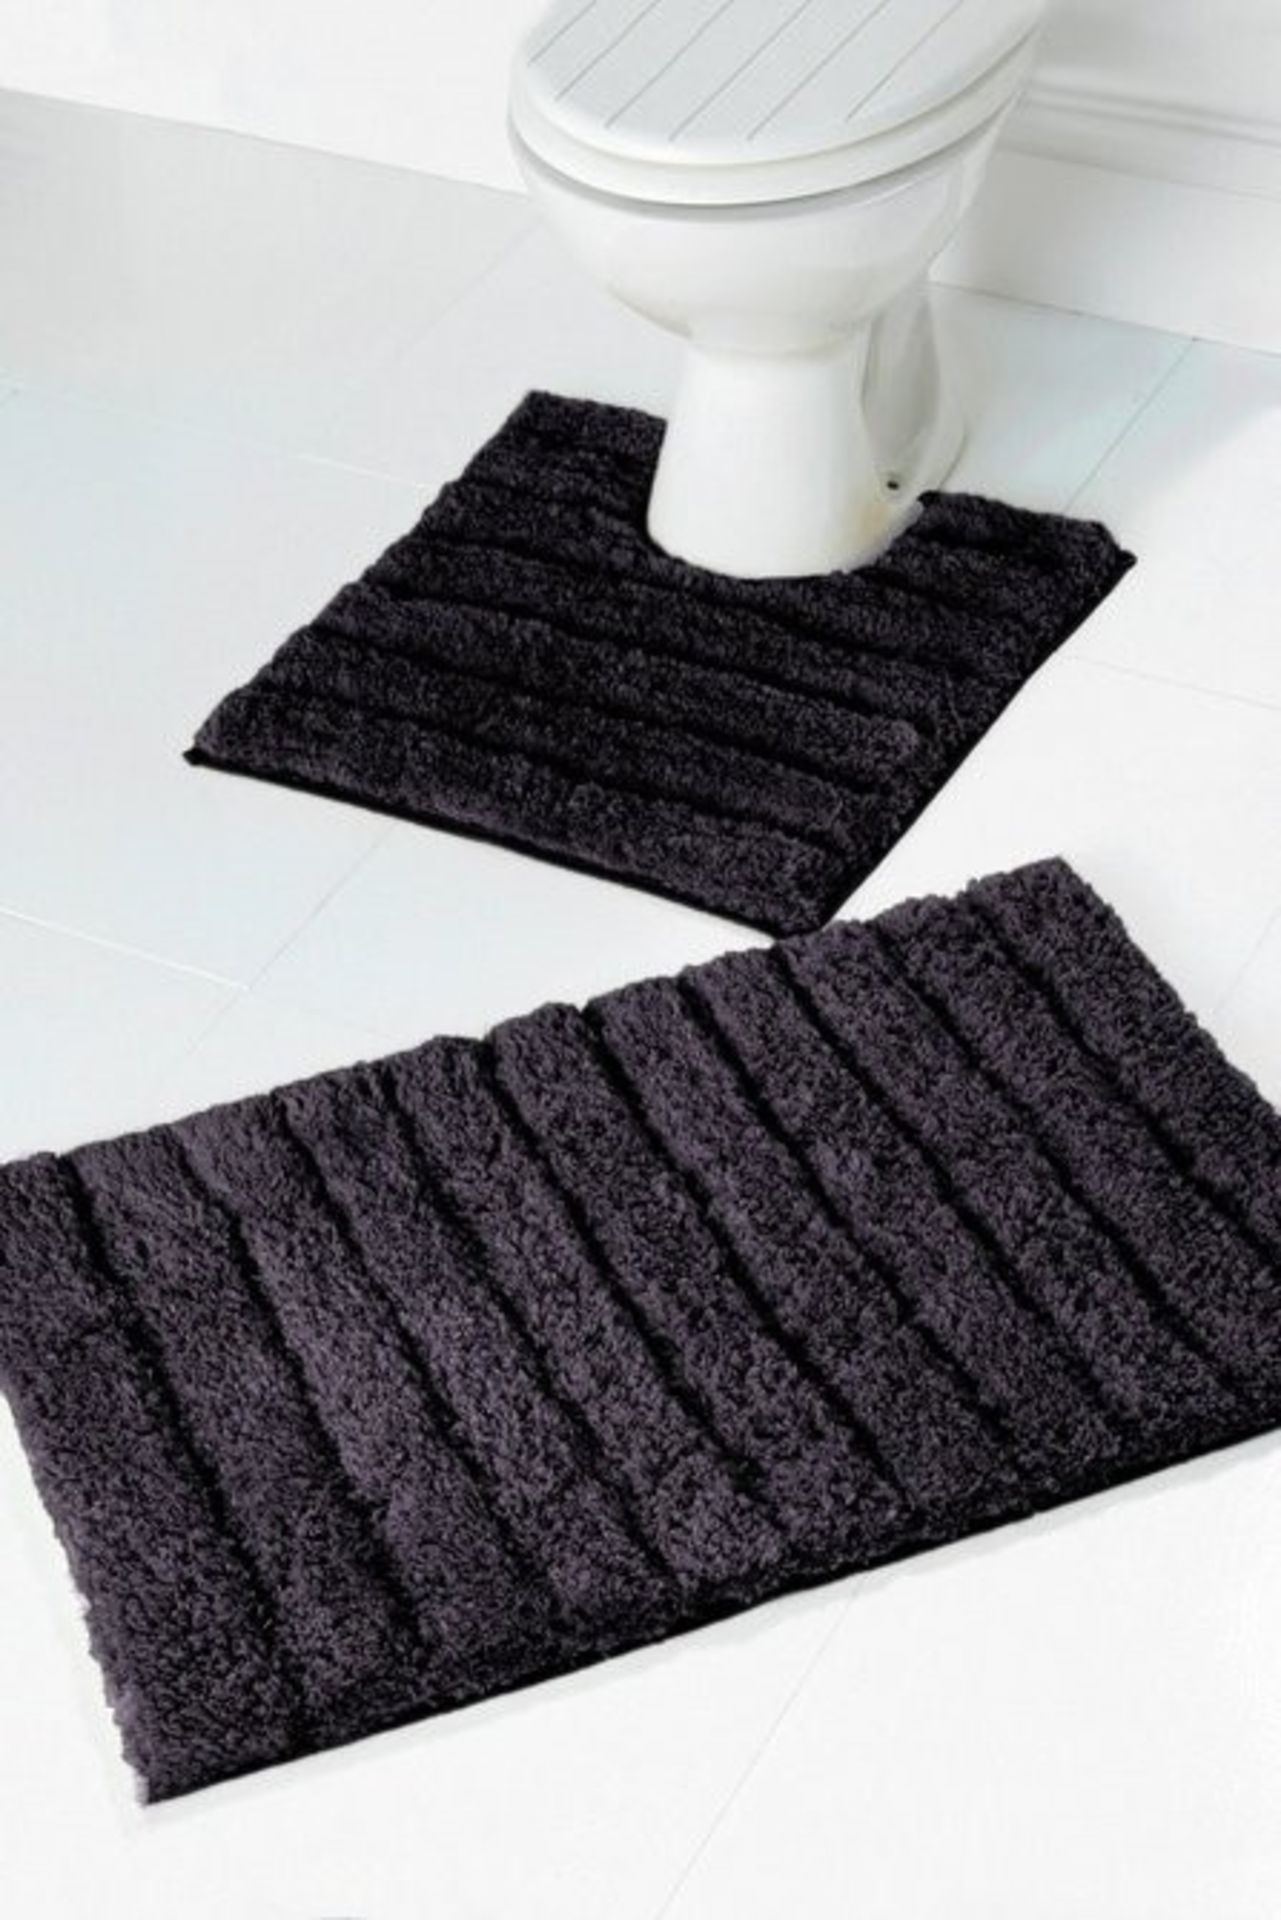 1 BAGGED SUPERSOFT SPARKLING BATH MAT SET IN CHARCOAL (PUBLIC VIEWING AVAILABLE)